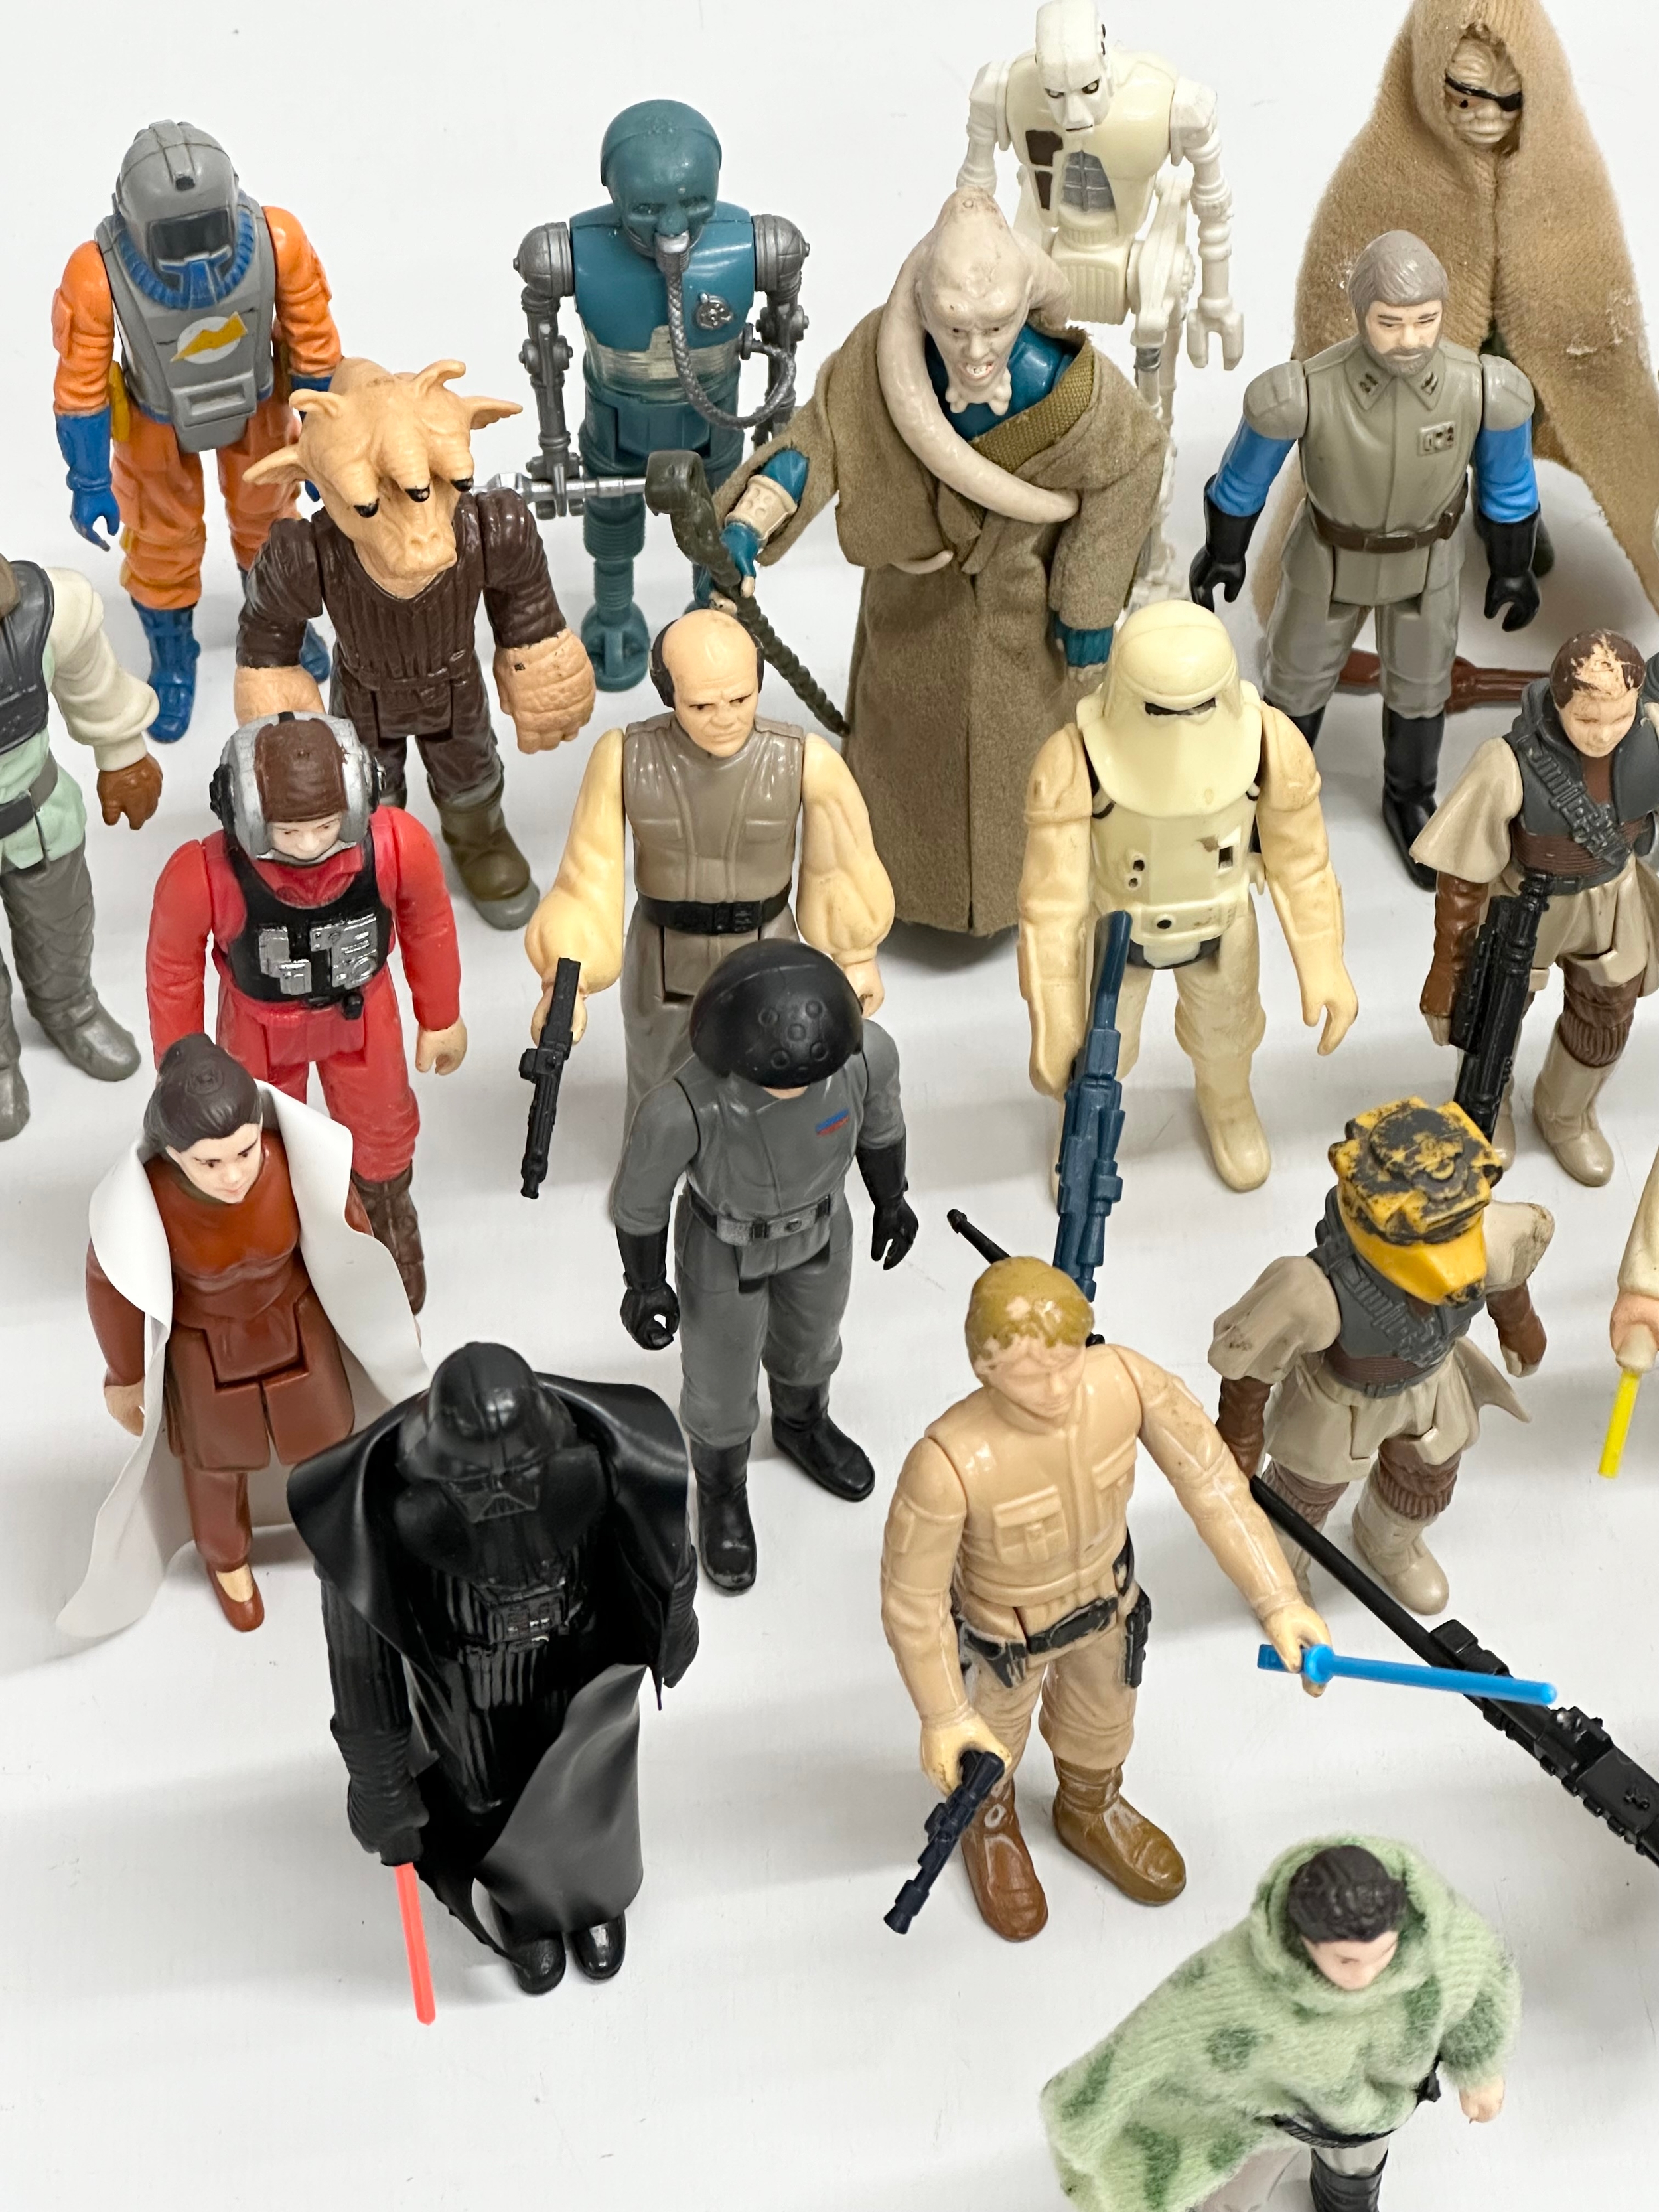 A collection of 1970’s/80’s Star Wars action figures and weapons. - Image 24 of 24